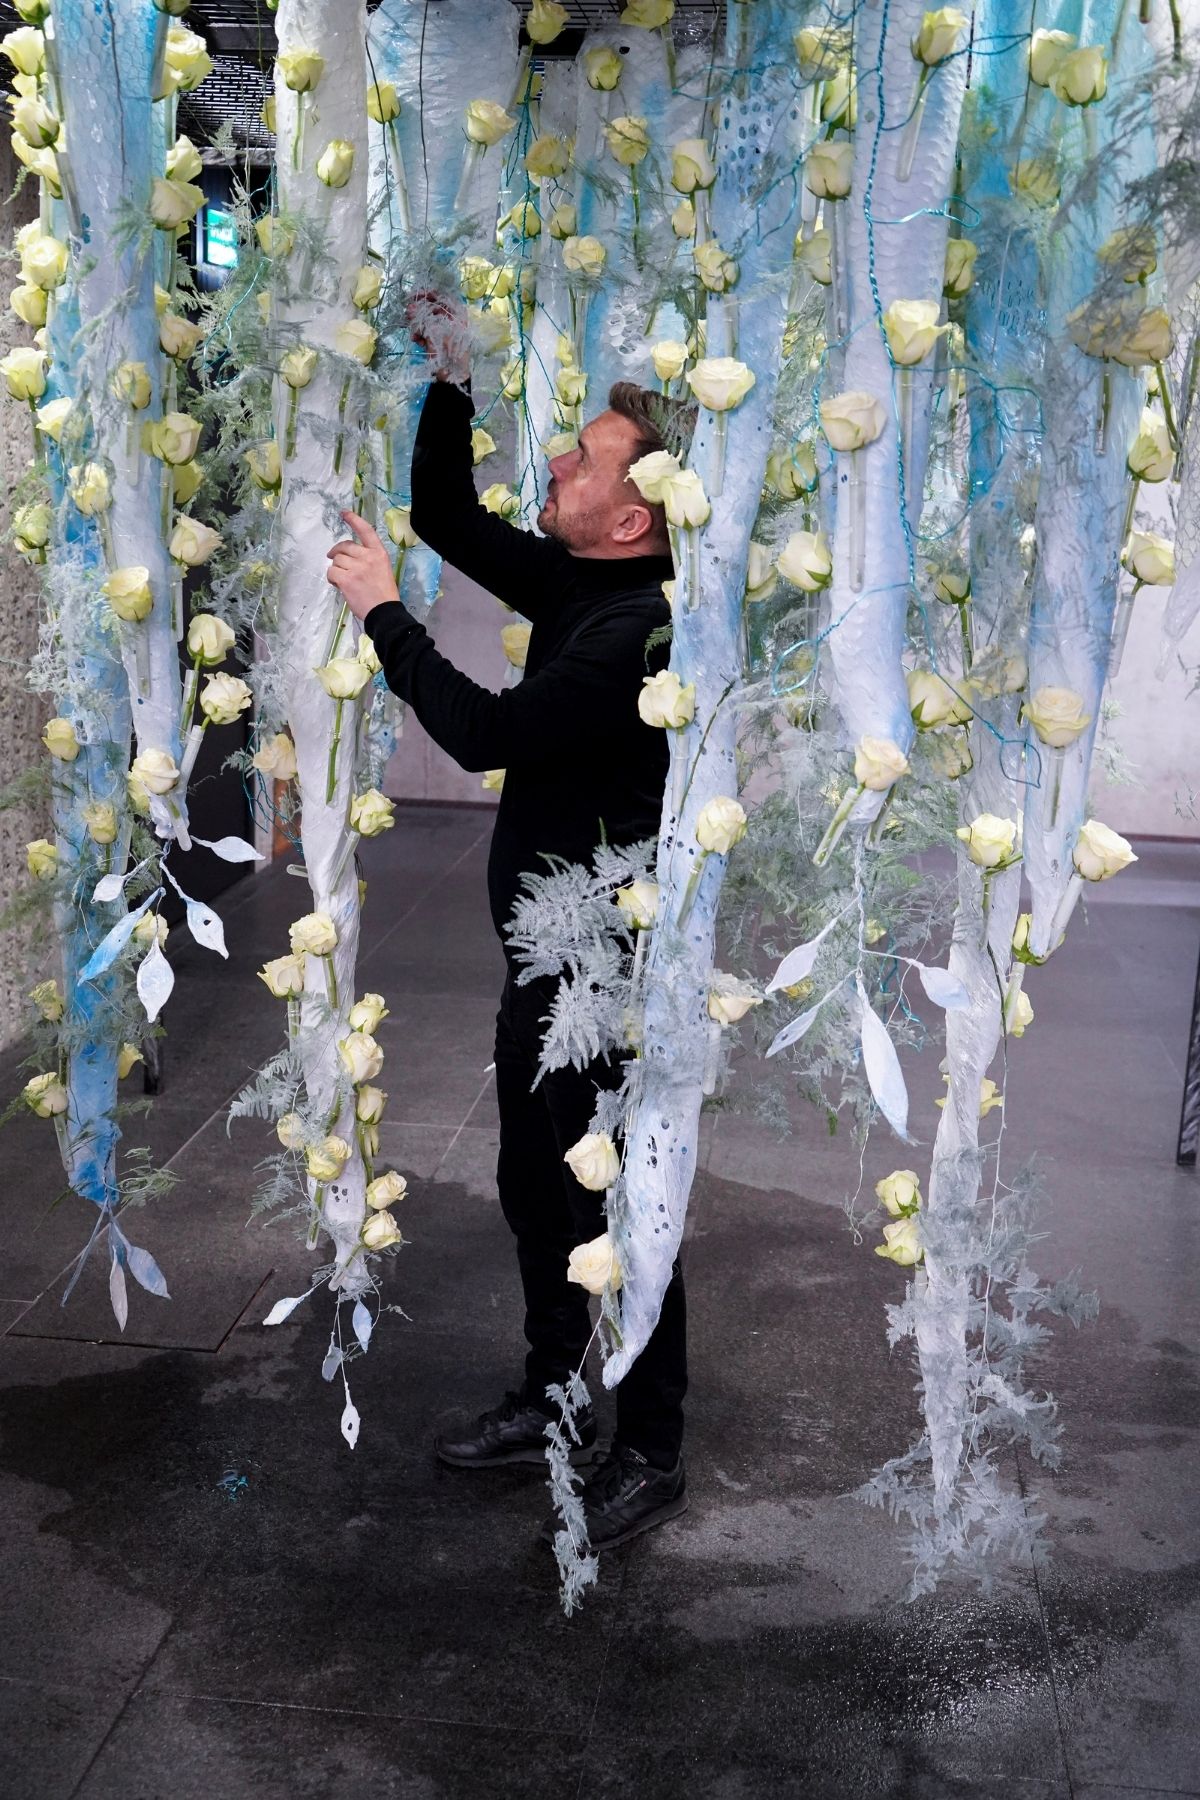 Icicles Glittering at the Center of Culture in Lublin, Zbigniew Dziwulski's Installation Brings Past and Future Together